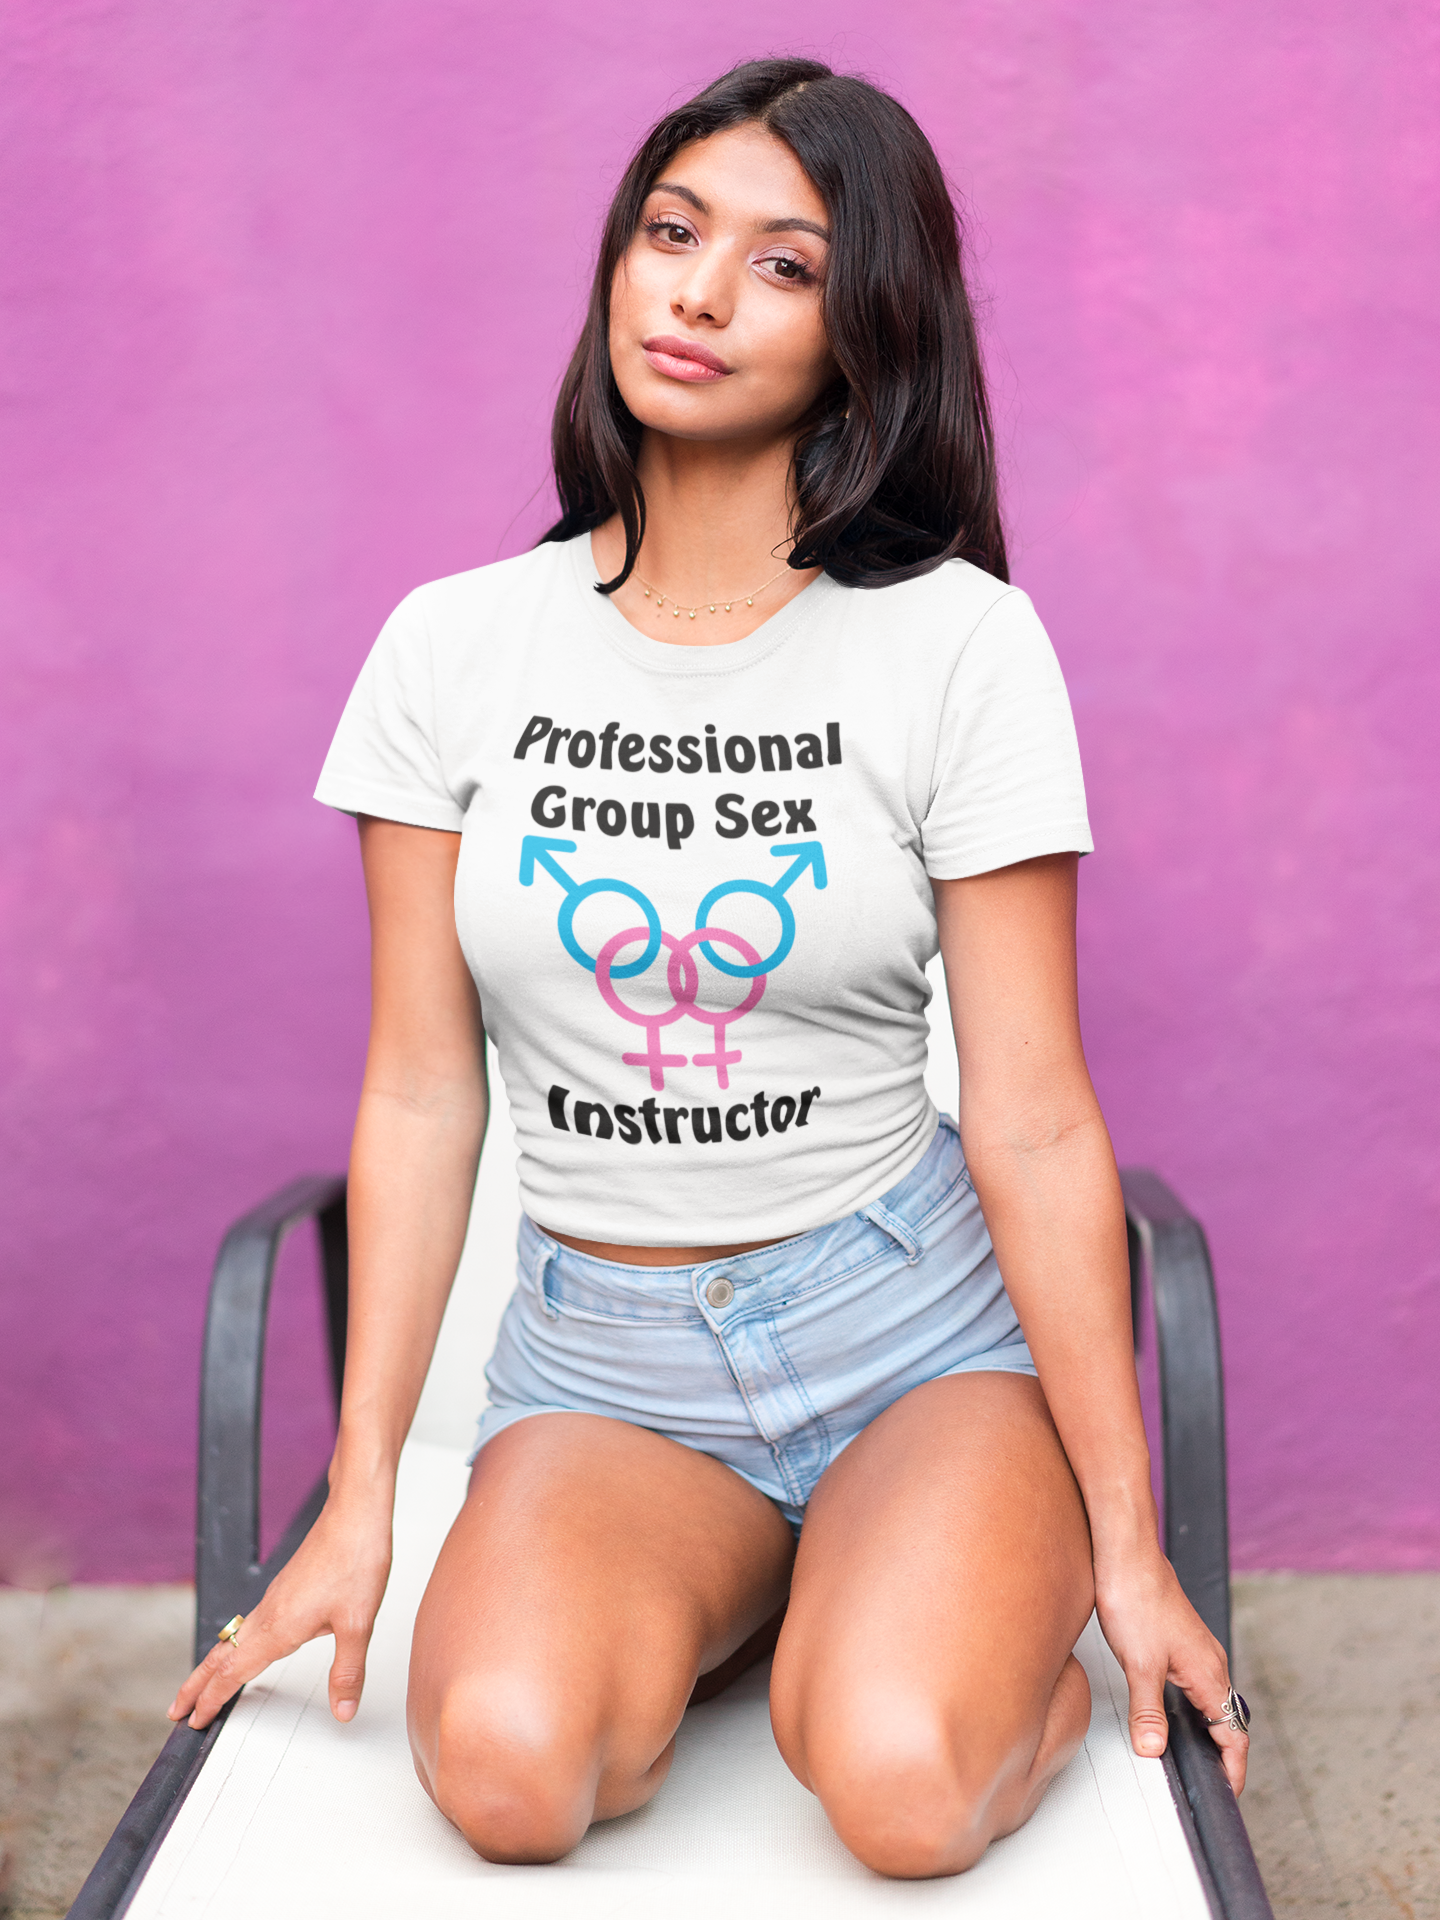 Professional Group Sex Instructor photo